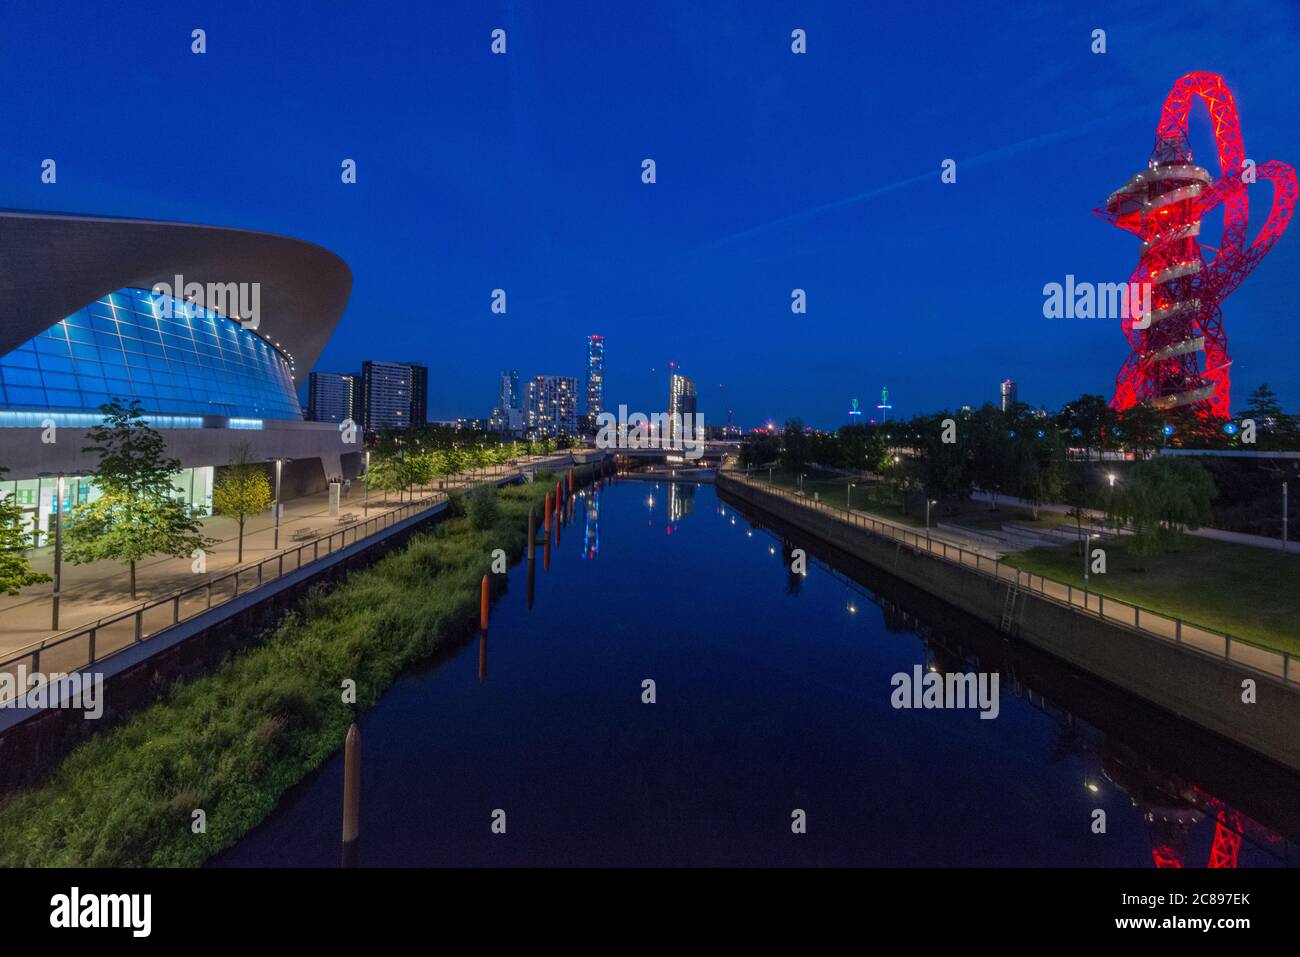 The Queen Elizabeth Olympic Park in Stratford, London, UK Stock Photo